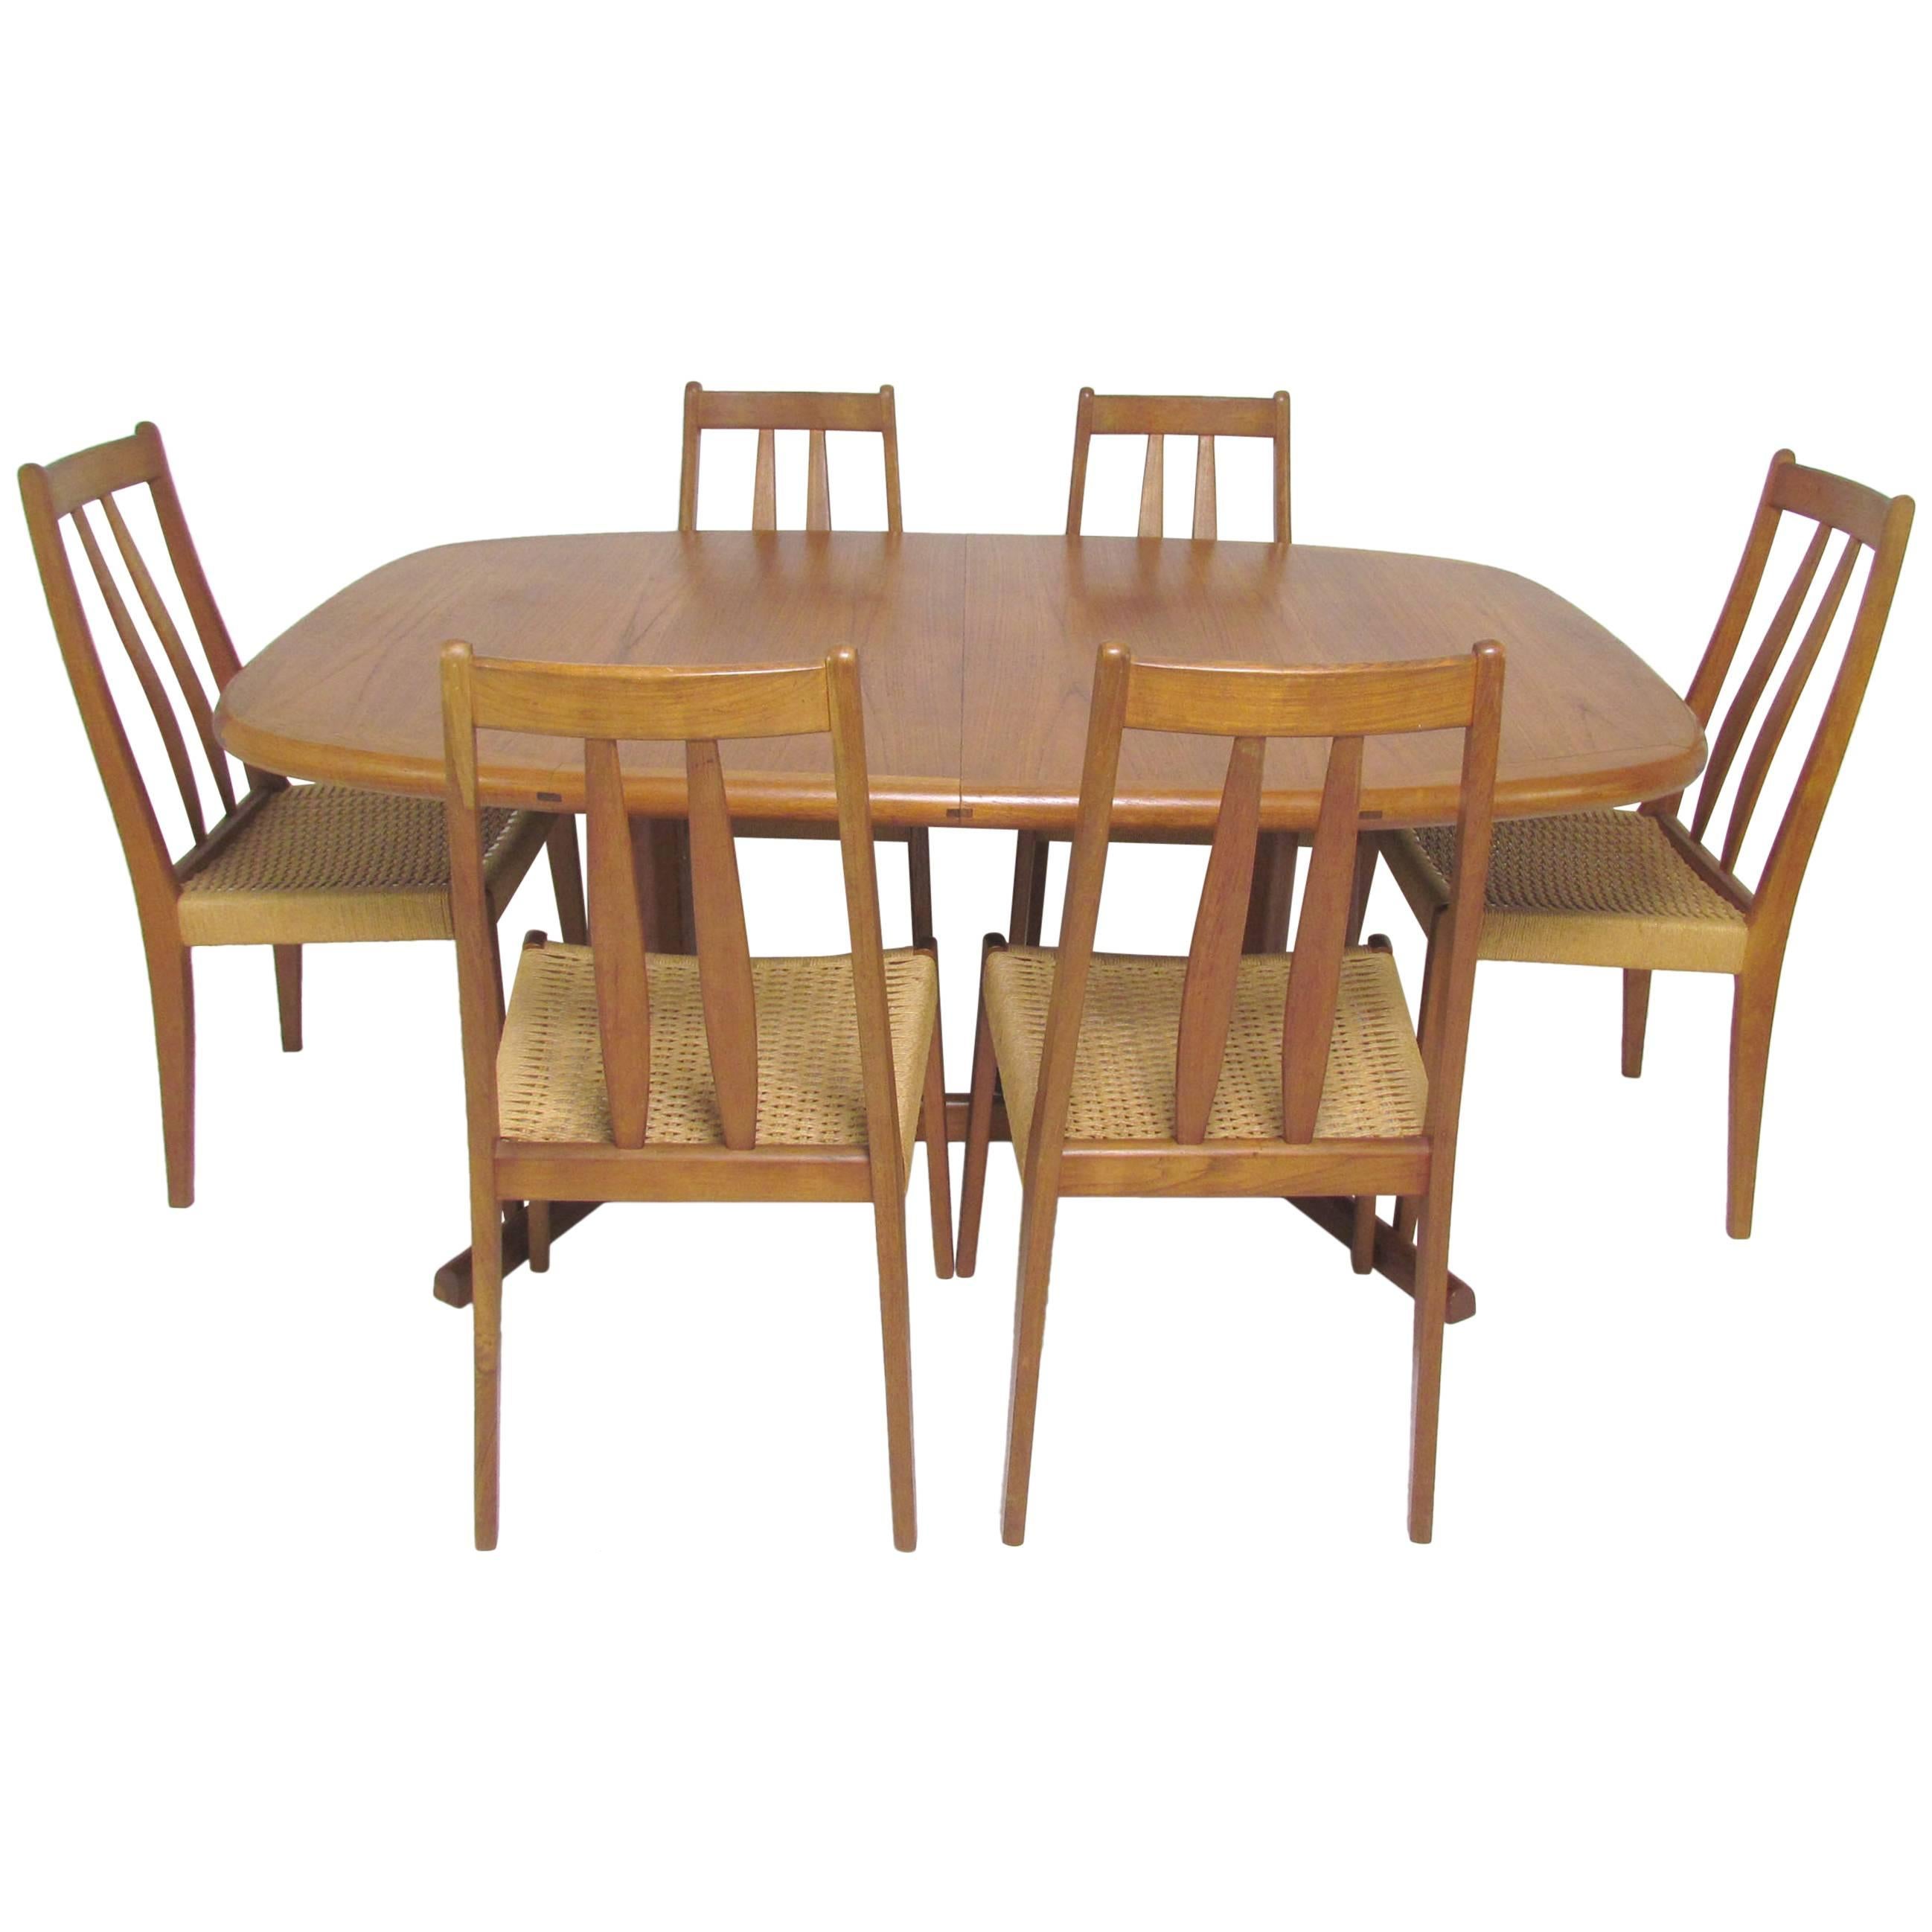 Danish Teak Dining Set, Expandable Oval Table and Six Chairs, circa 1970s